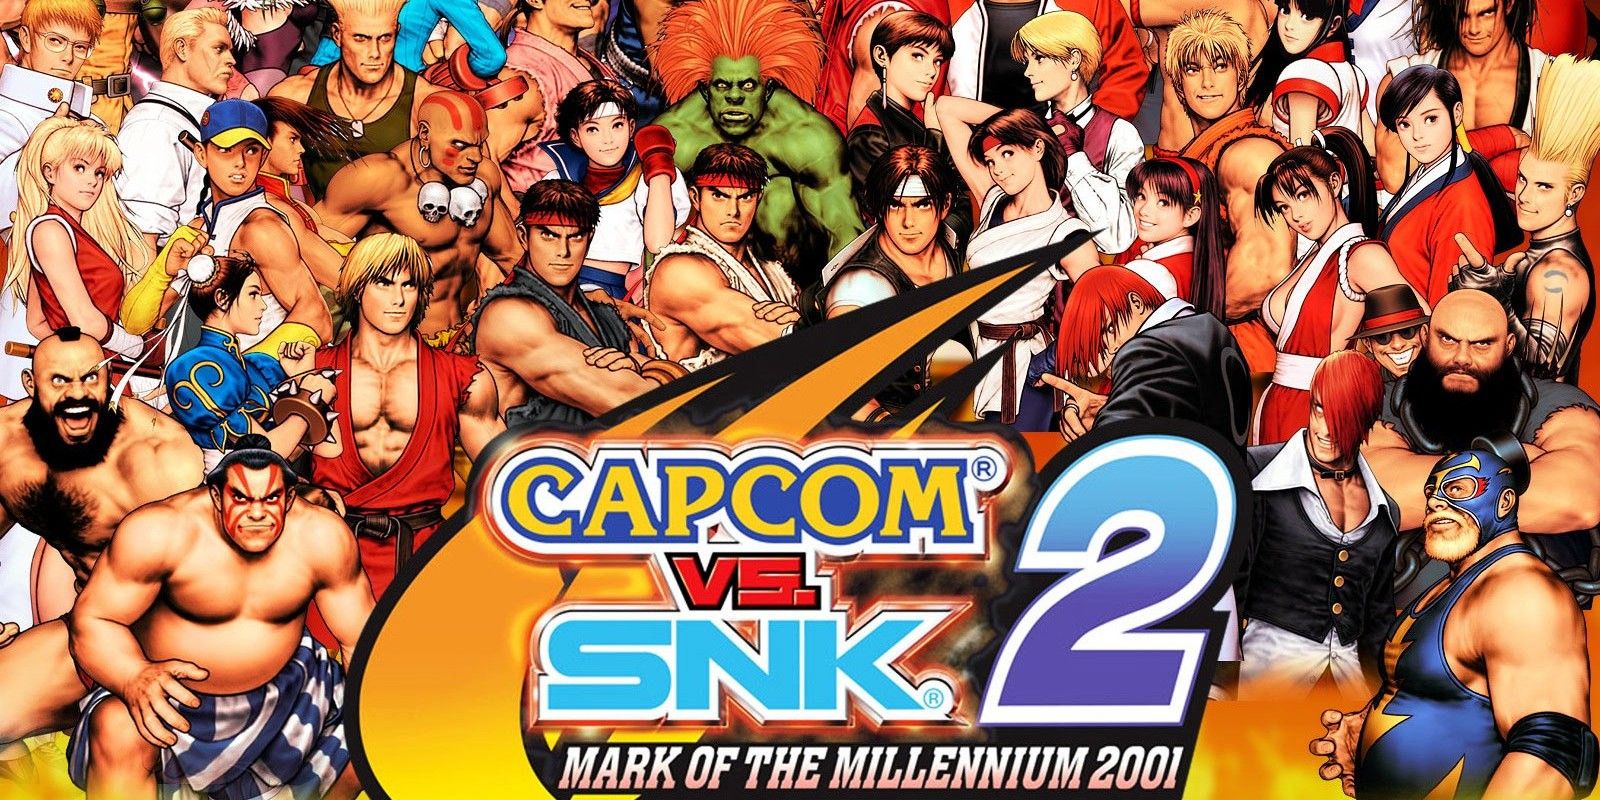 Capcom vs SNK 2 Is One Of The Best PS2 Games To Buy For PS3